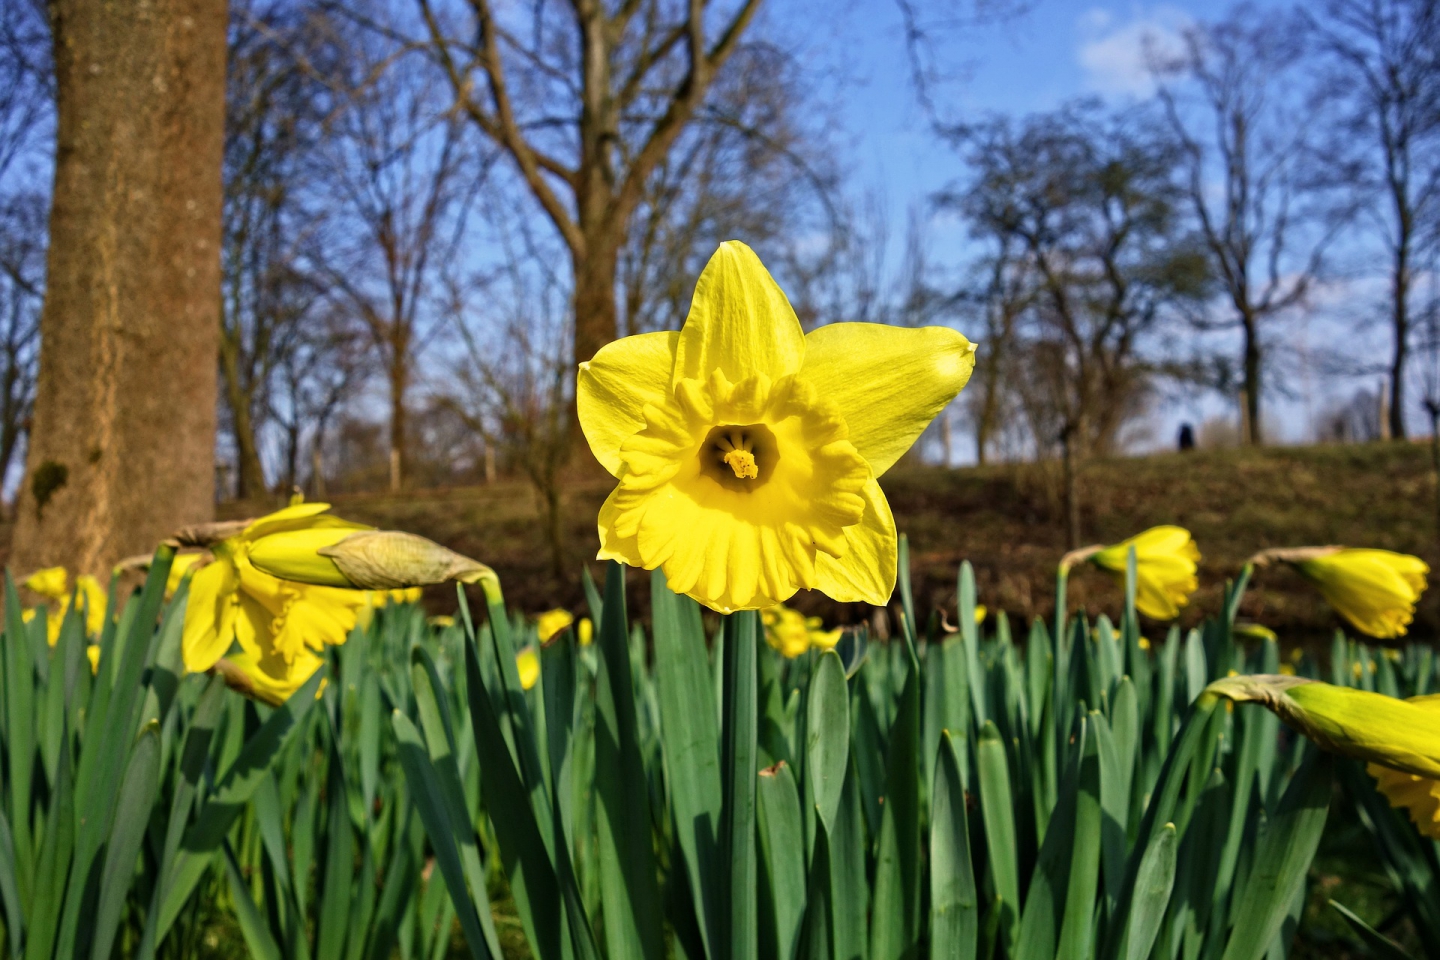 Daffodils by the wayside